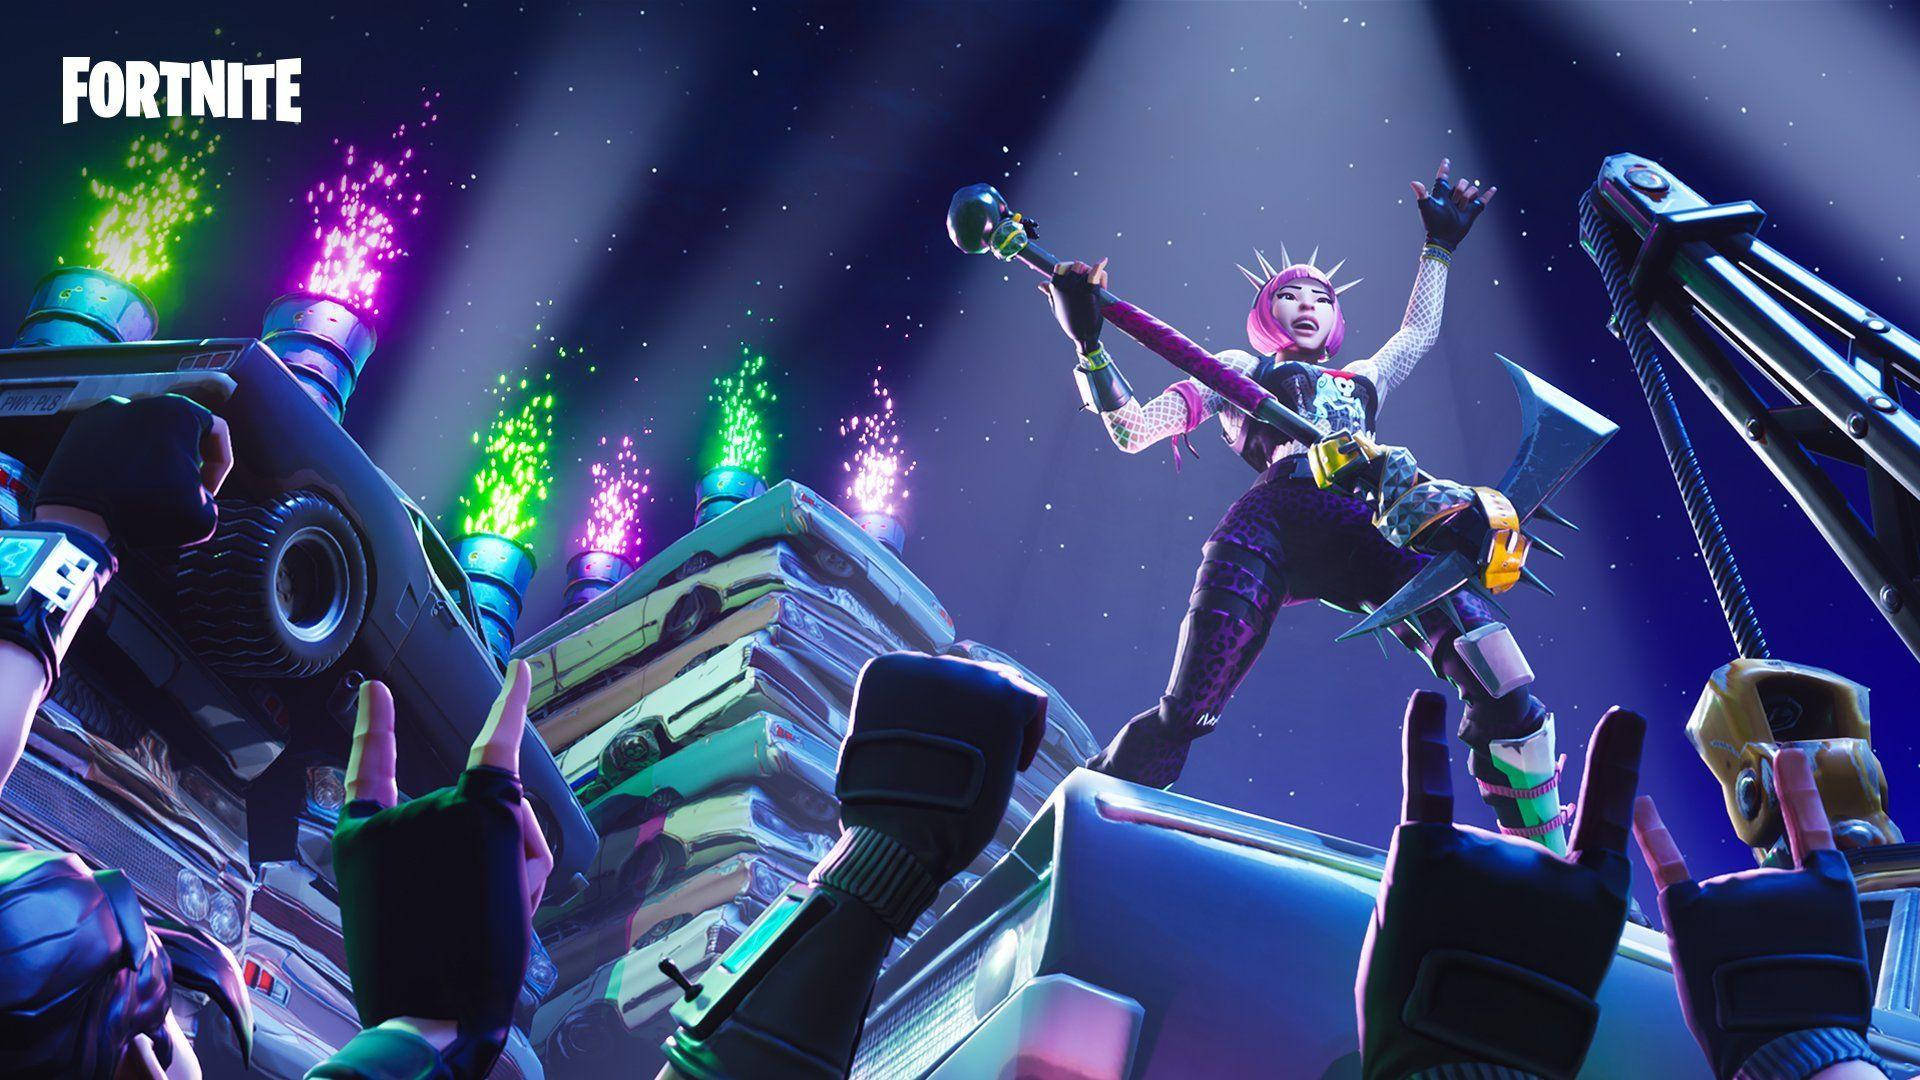 Cool Fortnite Skin At Rock And Roll Concert